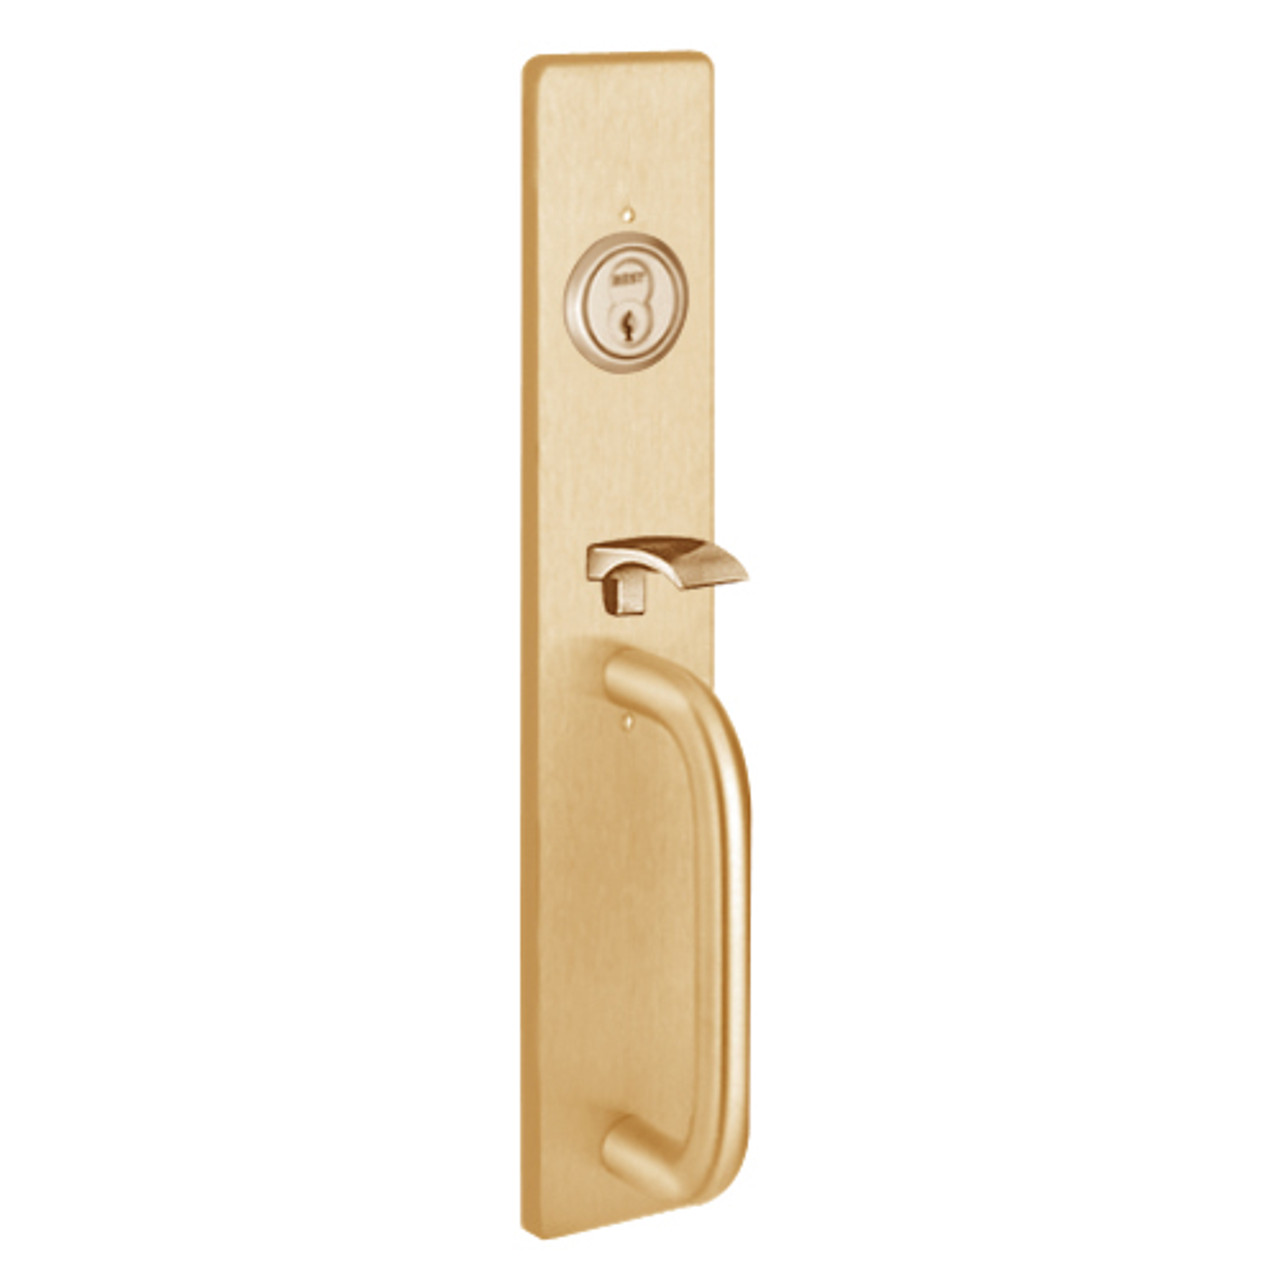 R1715C-612 PHI Thumb Piece Always Active Retrofit Trim with C Design Pull for Apex and Olympian Series Exit Device in Satin Bronze Finish